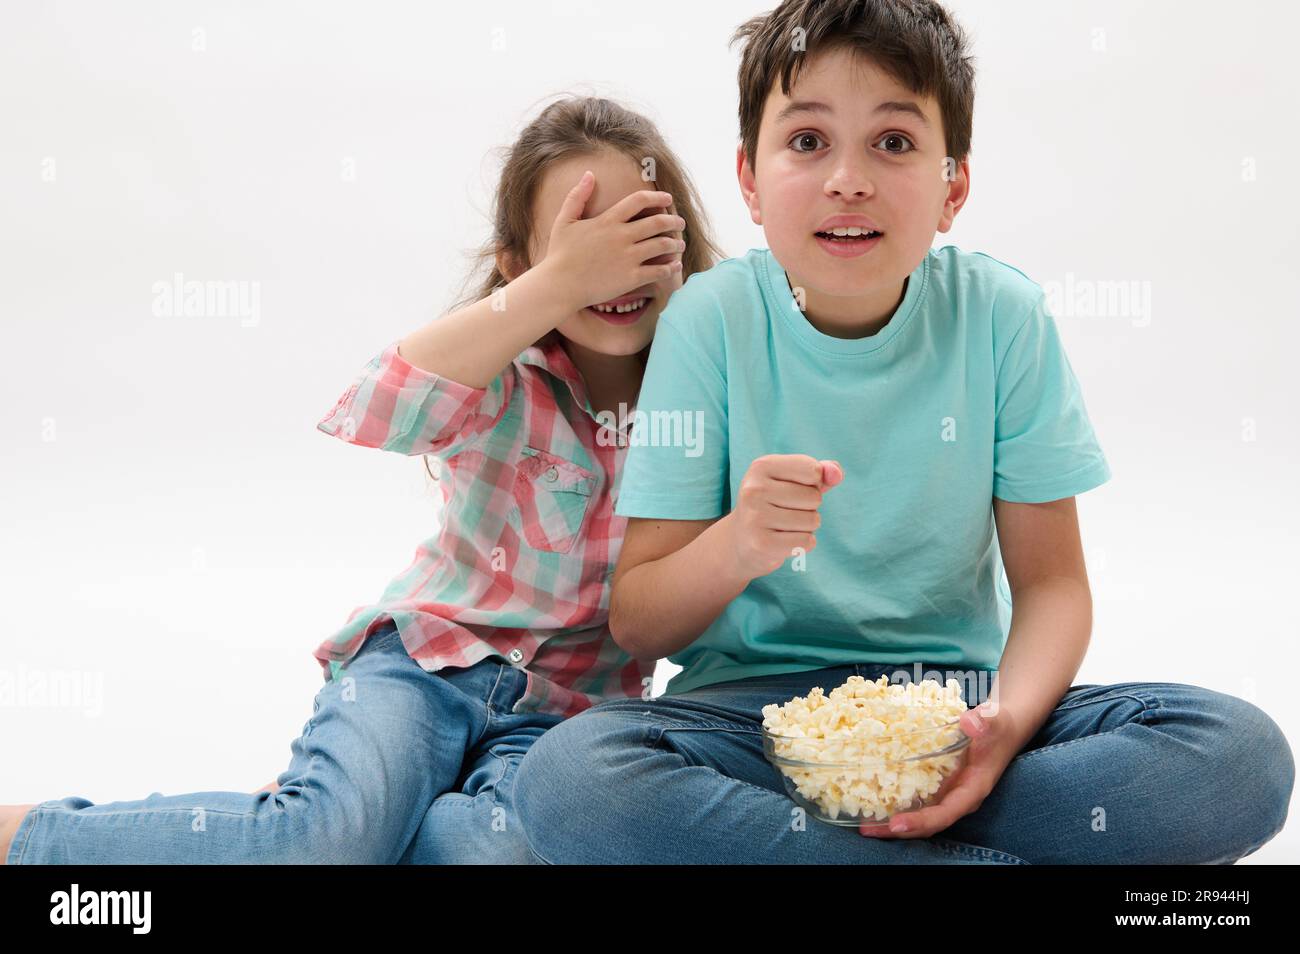 Amazed kids, teen boy and little child girl watching scary movie or cartoon, eating popcorn on white isolated background Stock Photo